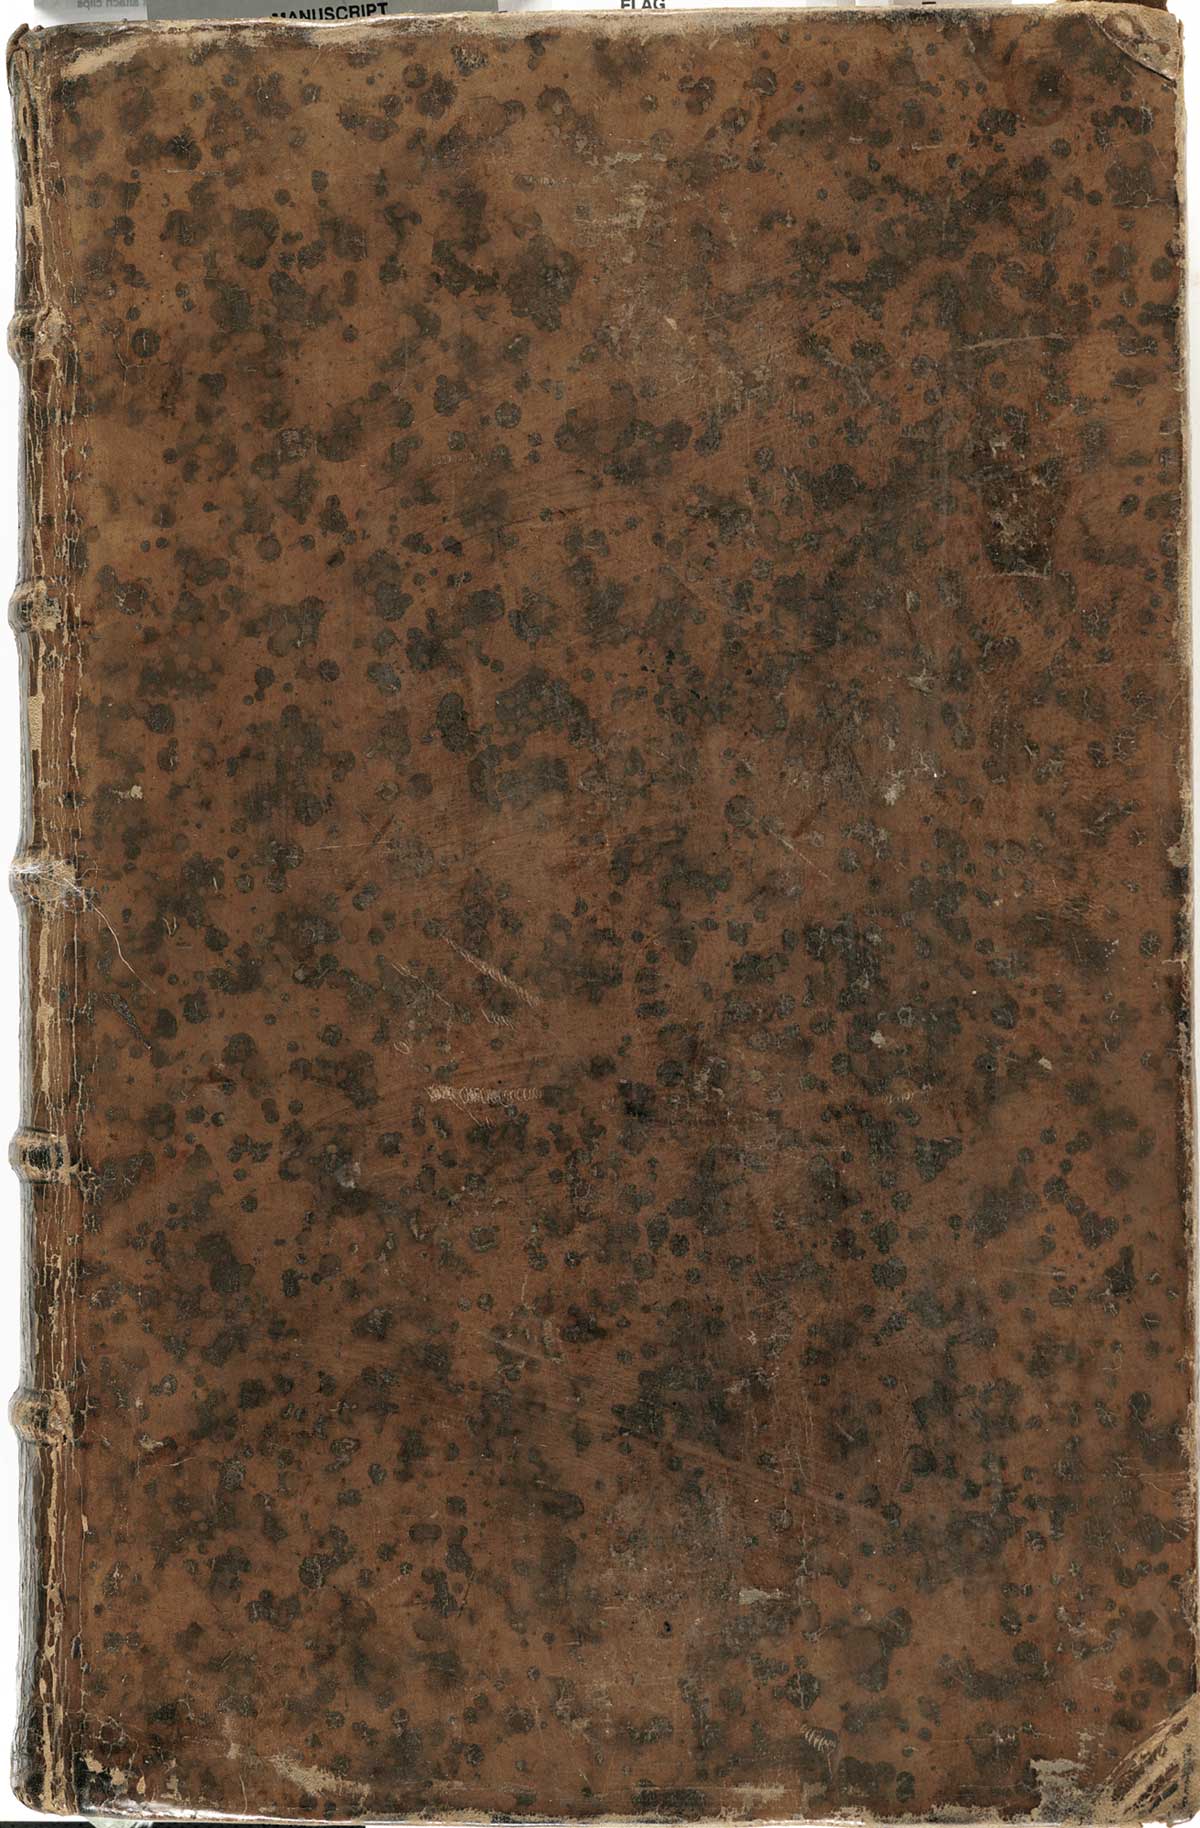 Contemporary leather cover of Ambroise Paré’s Oeuvres, NLM Call no.: WZ 240 P227 1585.